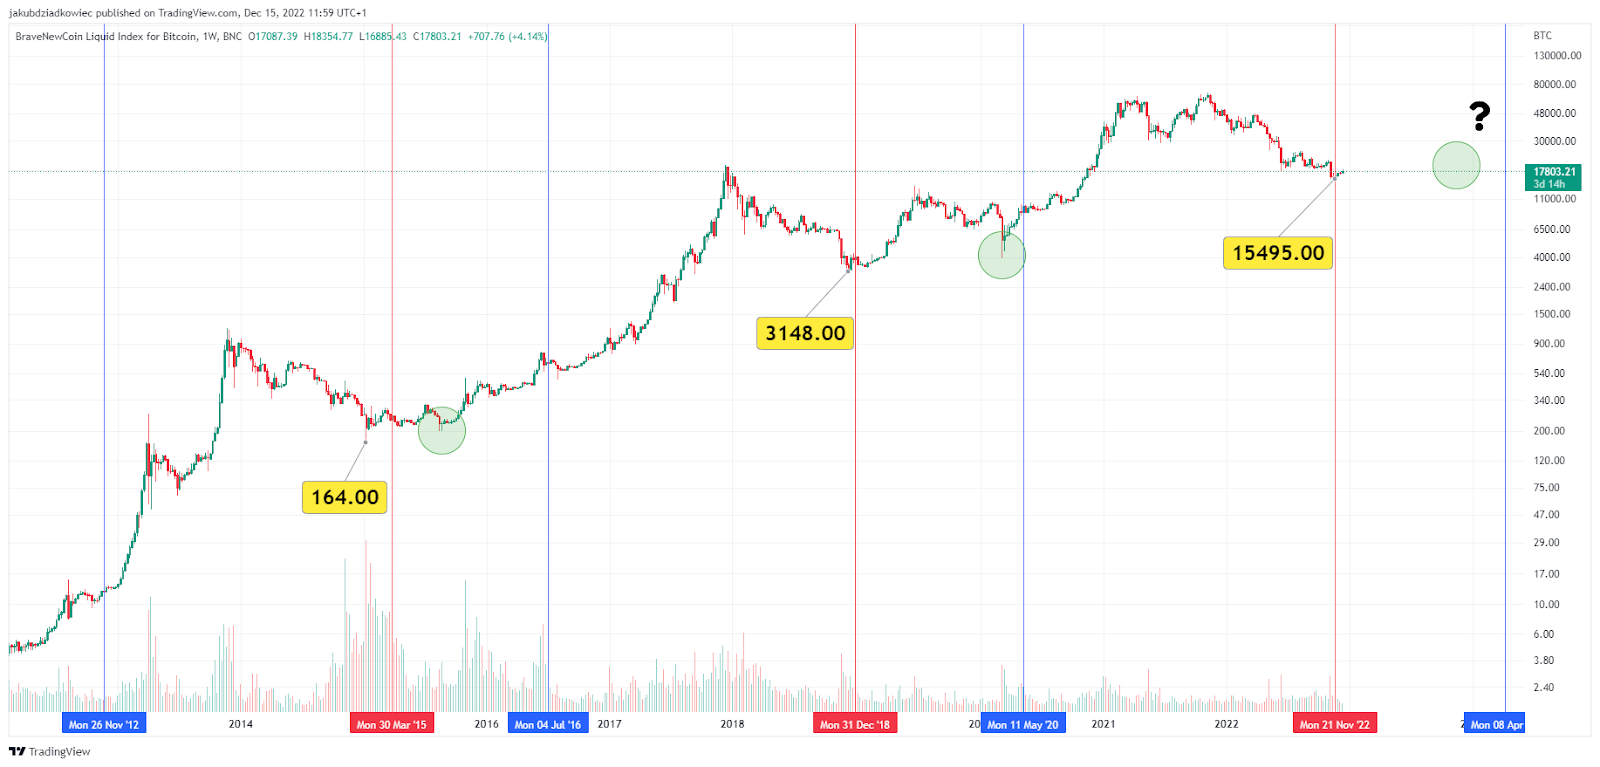 How to trade Bitcoin during the halving period? — TradingView News